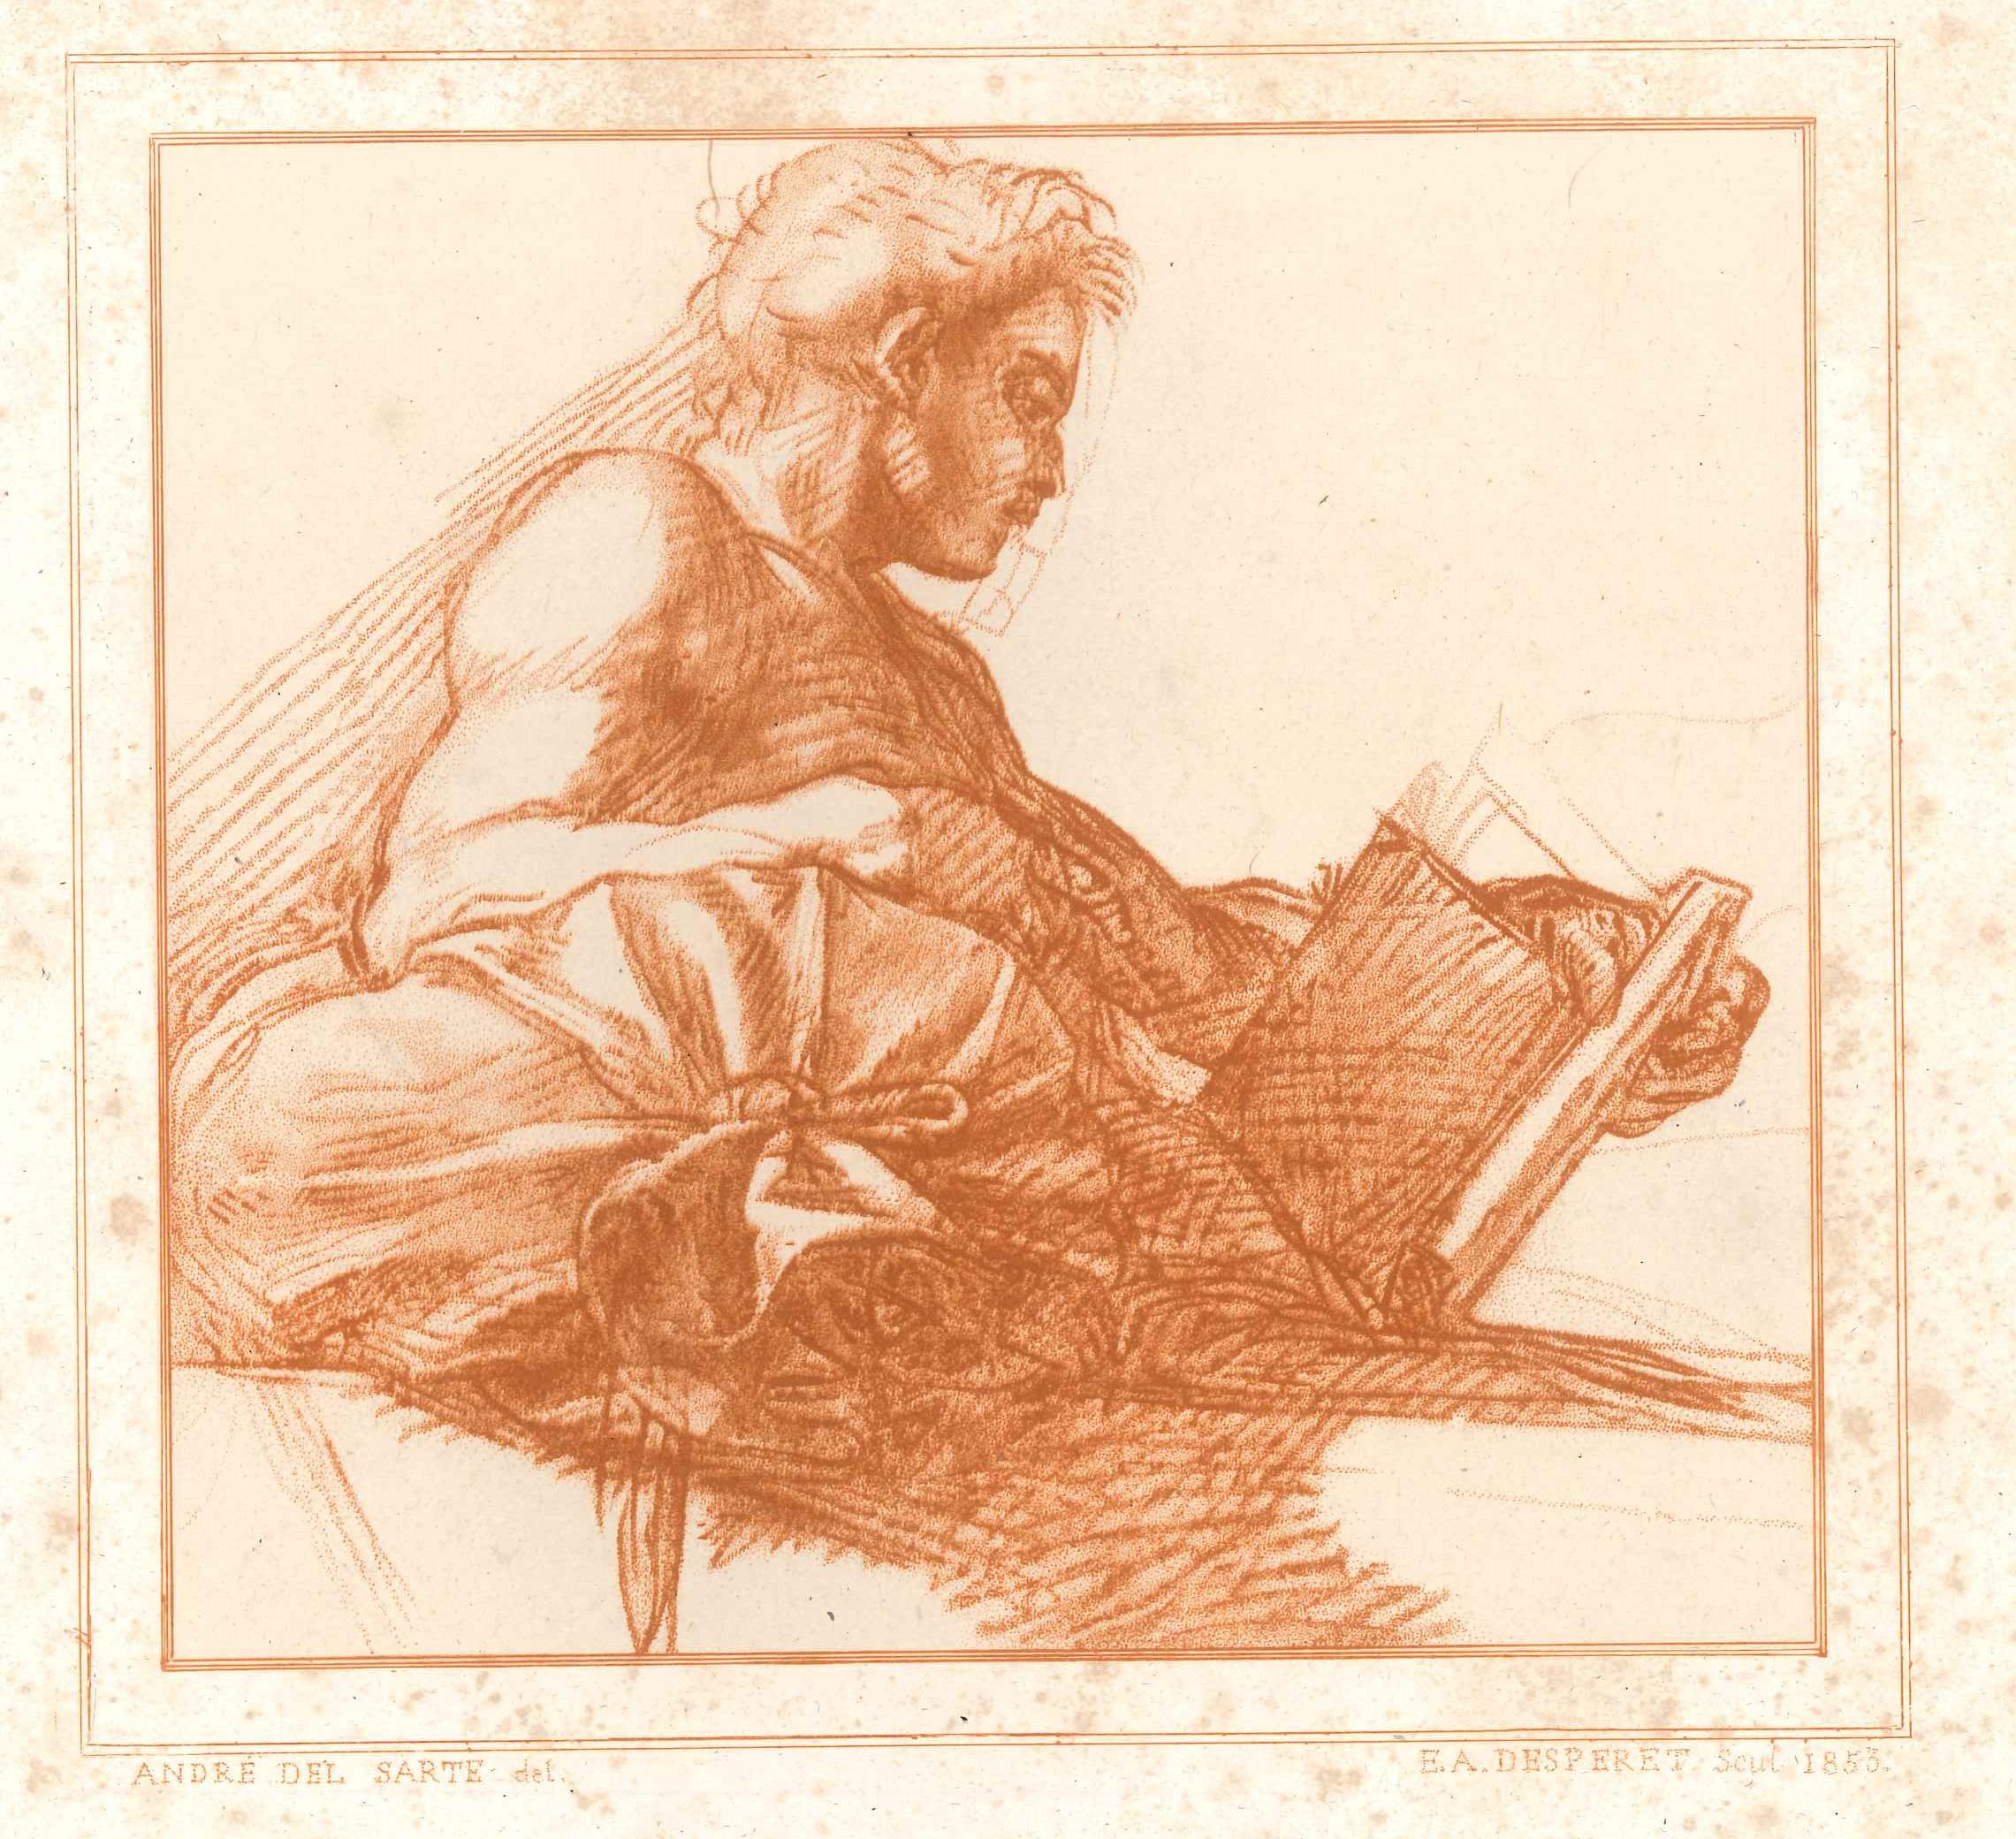 Reading man is a superb original print "en manière de crayon" by Auguste Desperet, after Andrea Del Sarto.  
Image dimensions: 17x17 cm.
This is a wonderful burnt Sienna artwork representing a man reading a book is realized with a wise and rapid